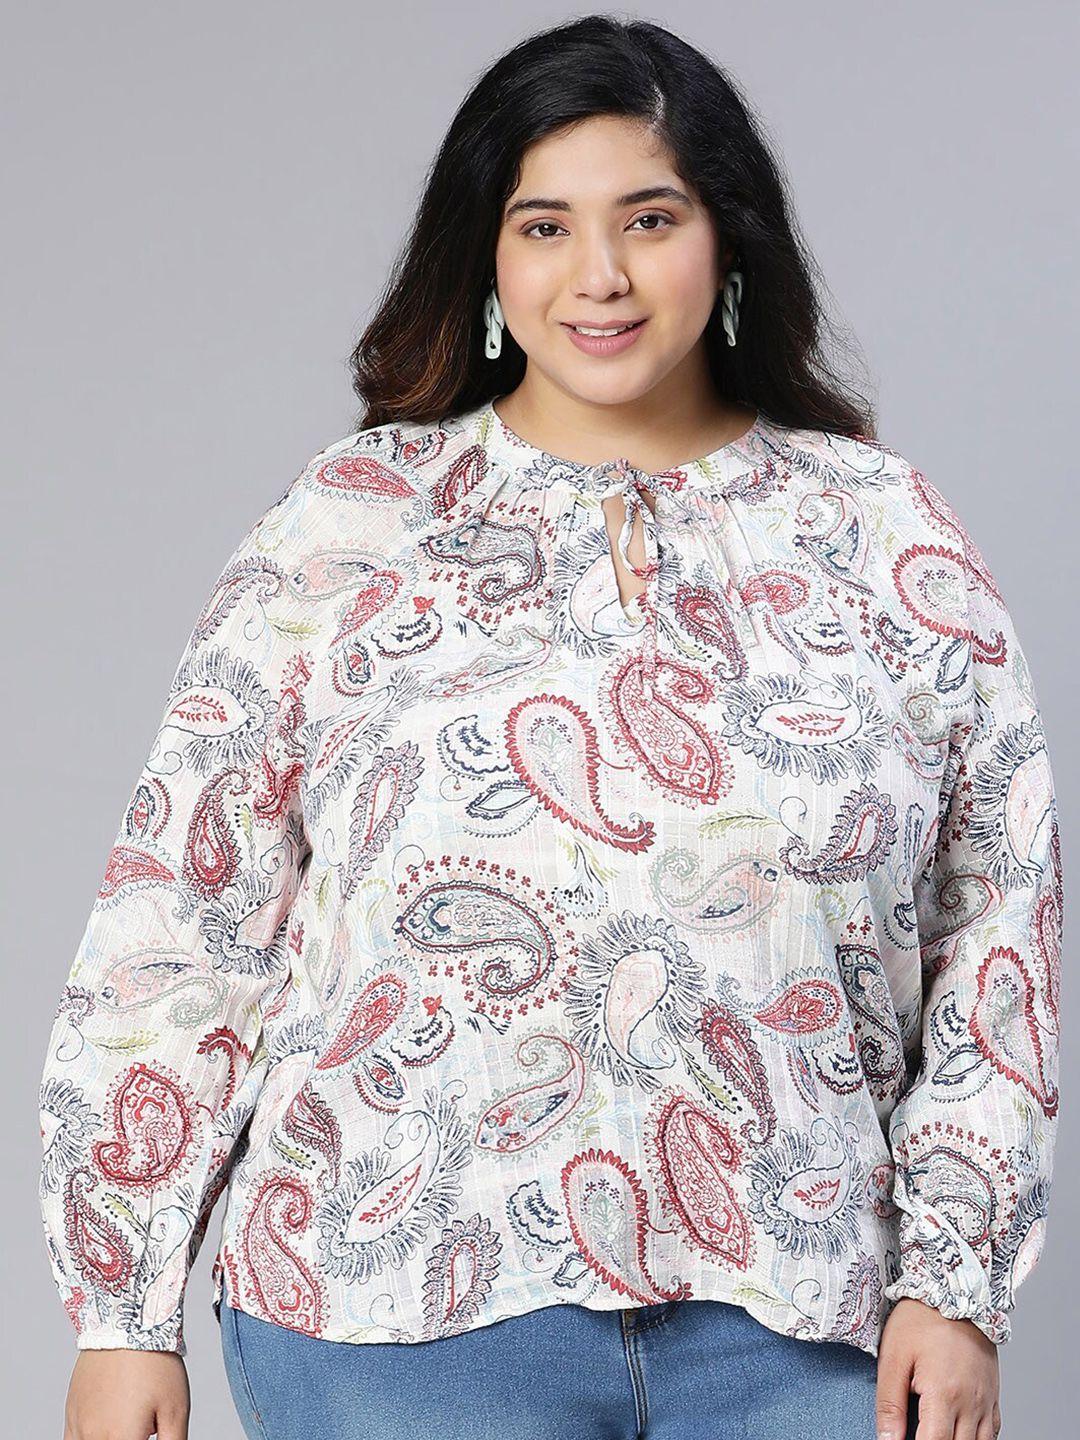 Oxolloxo Plus Size Ethnic Motif Printed Cotton Tie-Up Neck Top